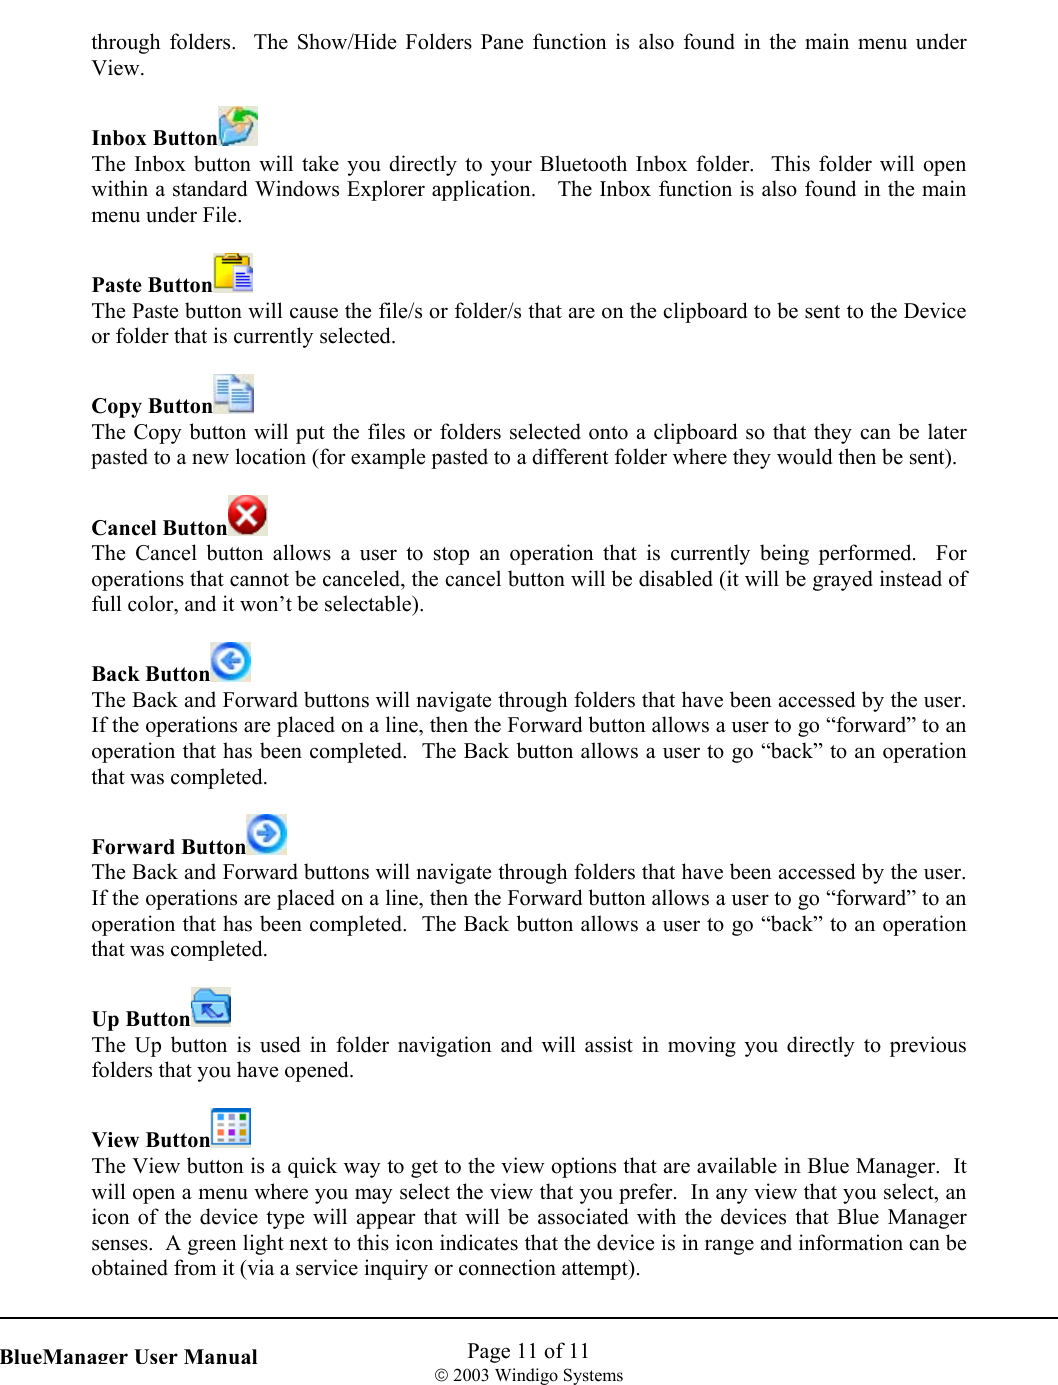    Page 11 of 11  2003 Windigo Systems   BlueManager User Manualthrough folders.  The Show/Hide Folders Pane function is also found in the main menu under View.  Inbox Button  The Inbox button will take you directly to your Bluetooth Inbox folder.  This folder will open within a standard Windows Explorer application.   The Inbox function is also found in the main menu under File.  Paste Button  The Paste button will cause the file/s or folder/s that are on the clipboard to be sent to the Device or folder that is currently selected.  Copy Button  The Copy button will put the files or folders selected onto a clipboard so that they can be later pasted to a new location (for example pasted to a different folder where they would then be sent).  Cancel Button  The Cancel button allows a user to stop an operation that is currently being performed.  For operations that cannot be canceled, the cancel button will be disabled (it will be grayed instead of full color, and it won’t be selectable).  Back Button  The Back and Forward buttons will navigate through folders that have been accessed by the user.  If the operations are placed on a line, then the Forward button allows a user to go “forward” to an operation that has been completed.  The Back button allows a user to go “back” to an operation that was completed.    Forward Button  The Back and Forward buttons will navigate through folders that have been accessed by the user.  If the operations are placed on a line, then the Forward button allows a user to go “forward” to an operation that has been completed.  The Back button allows a user to go “back” to an operation that was completed.  Up Button  The Up button is used in folder navigation and will assist in moving you directly to previous folders that you have opened.    View Button  The View button is a quick way to get to the view options that are available in Blue Manager.  It will open a menu where you may select the view that you prefer.  In any view that you select, an icon of the device type will appear that will be associated with the devices that Blue Manager senses.  A green light next to this icon indicates that the device is in range and information can be obtained from it (via a service inquiry or connection attempt).  